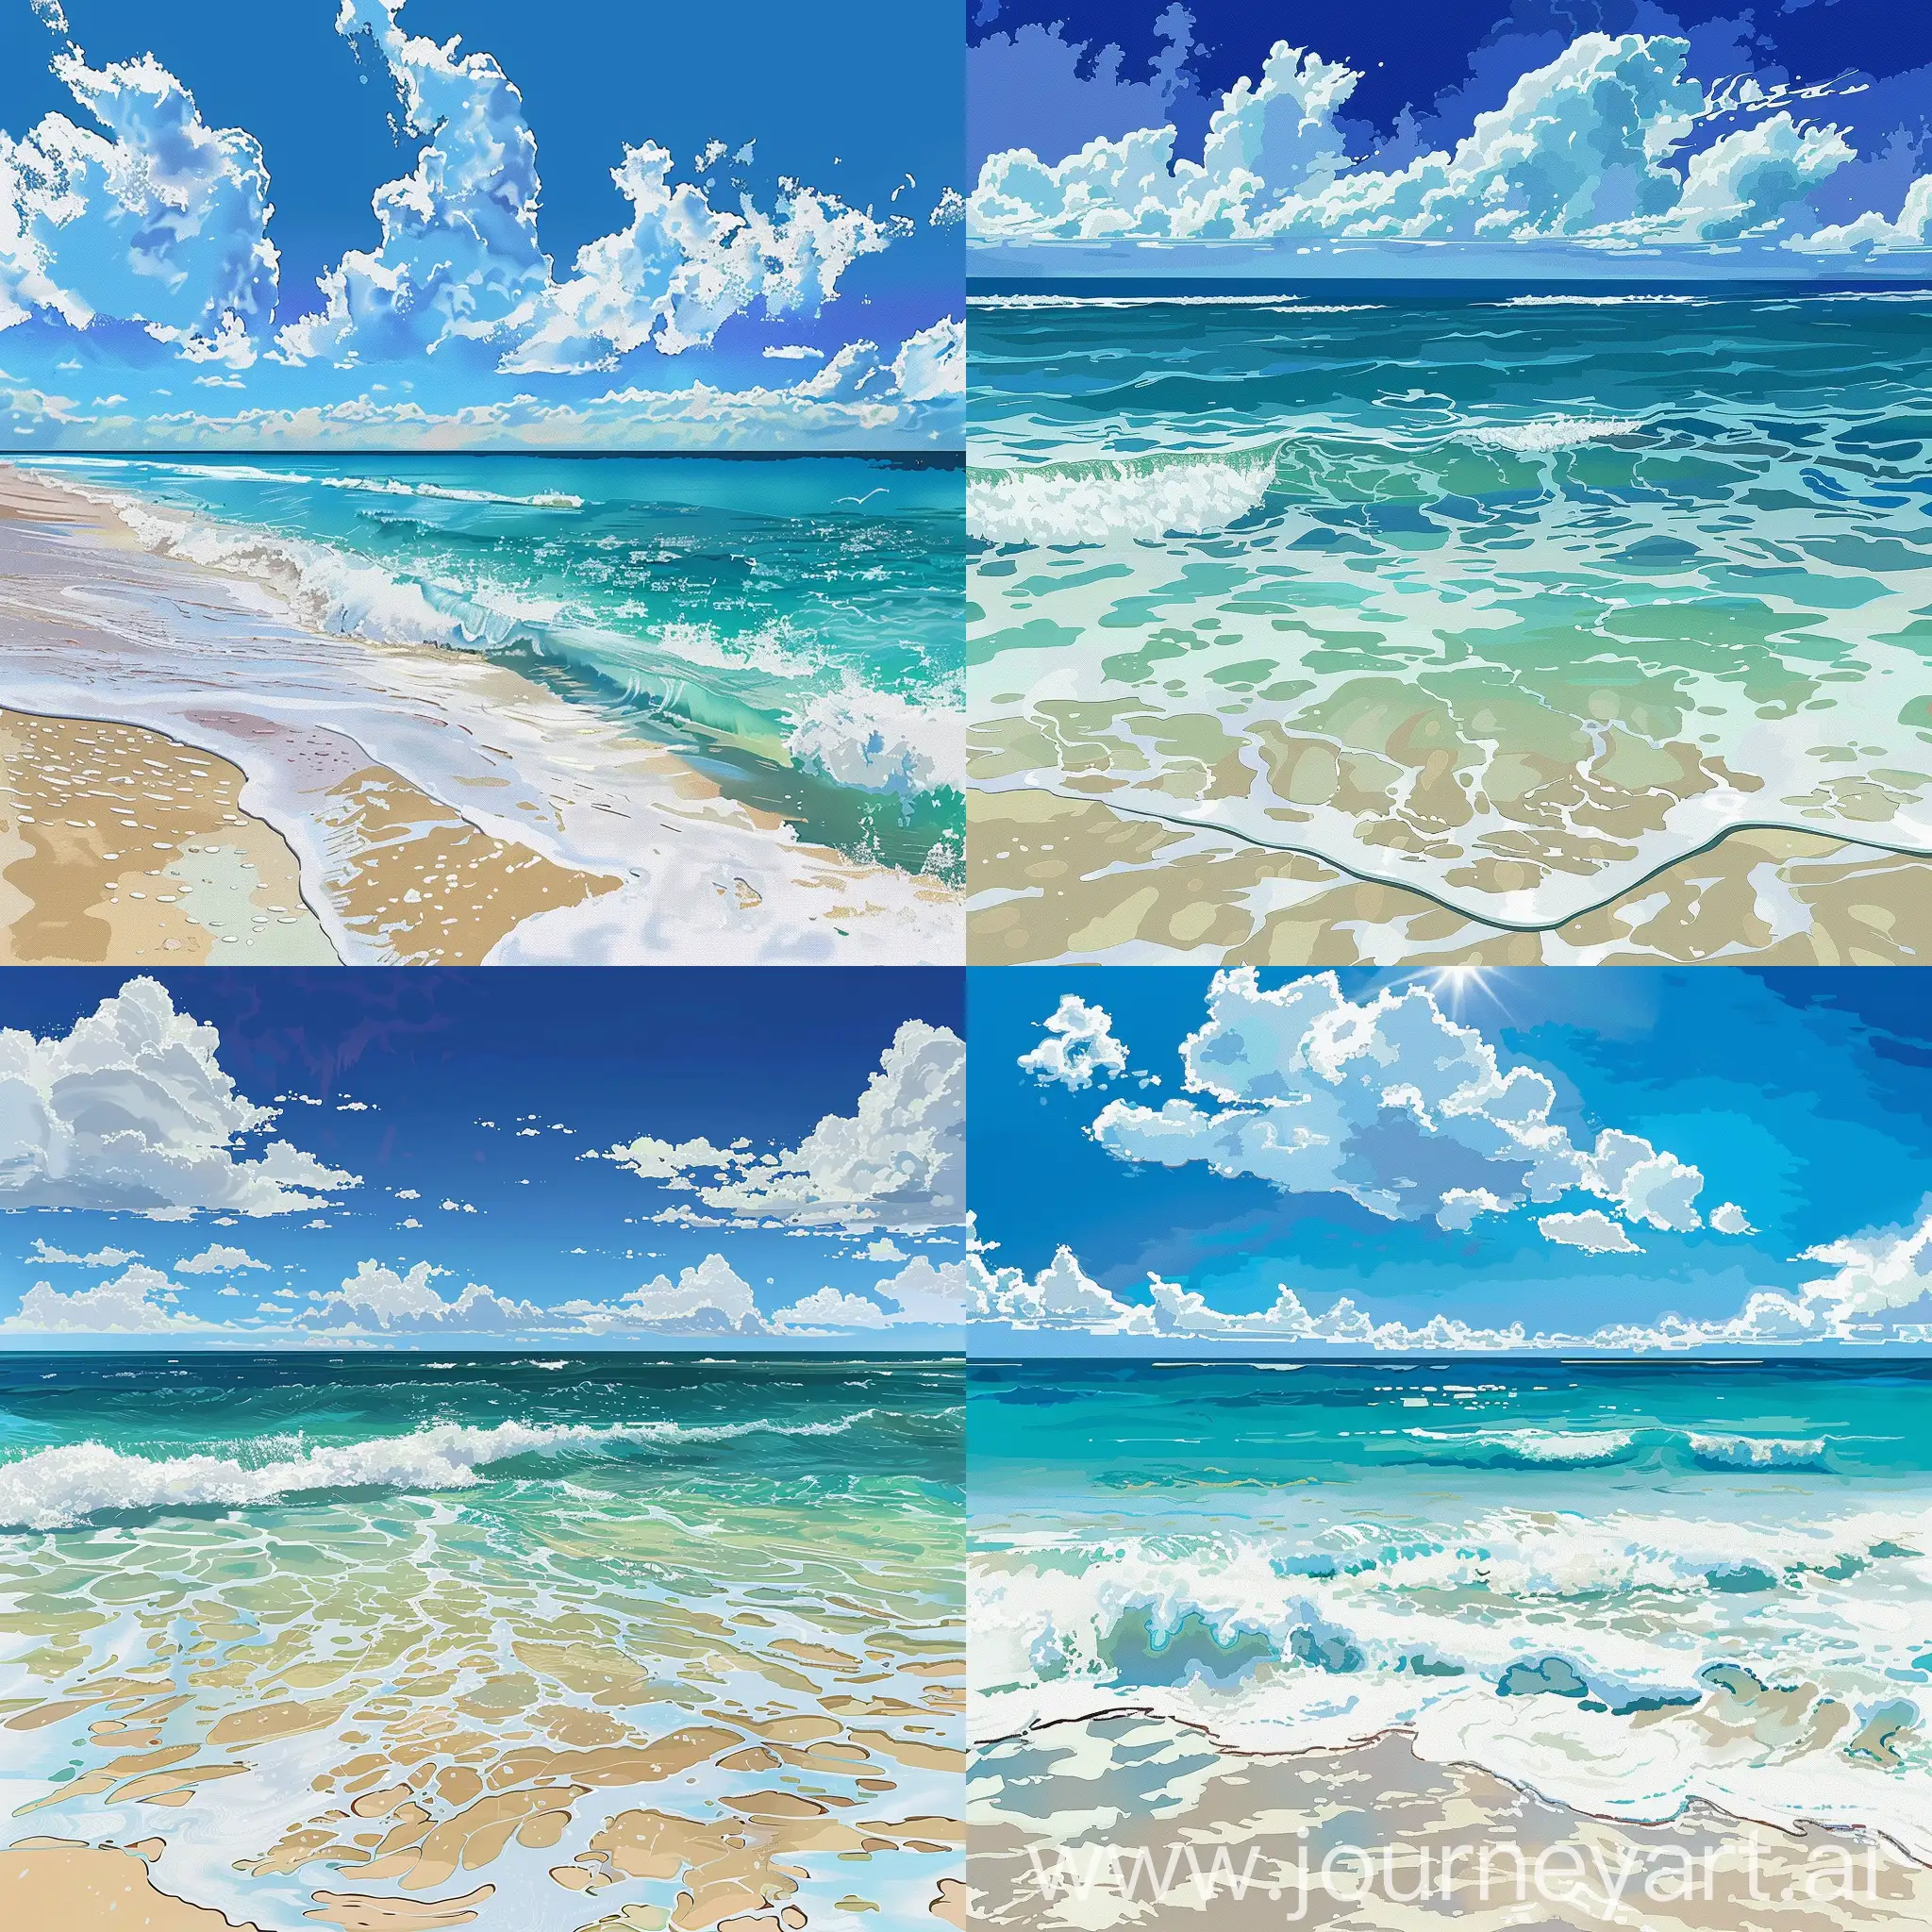 an image of a stunning beach with overlapping ocean waves and clear blue skies , illustrated